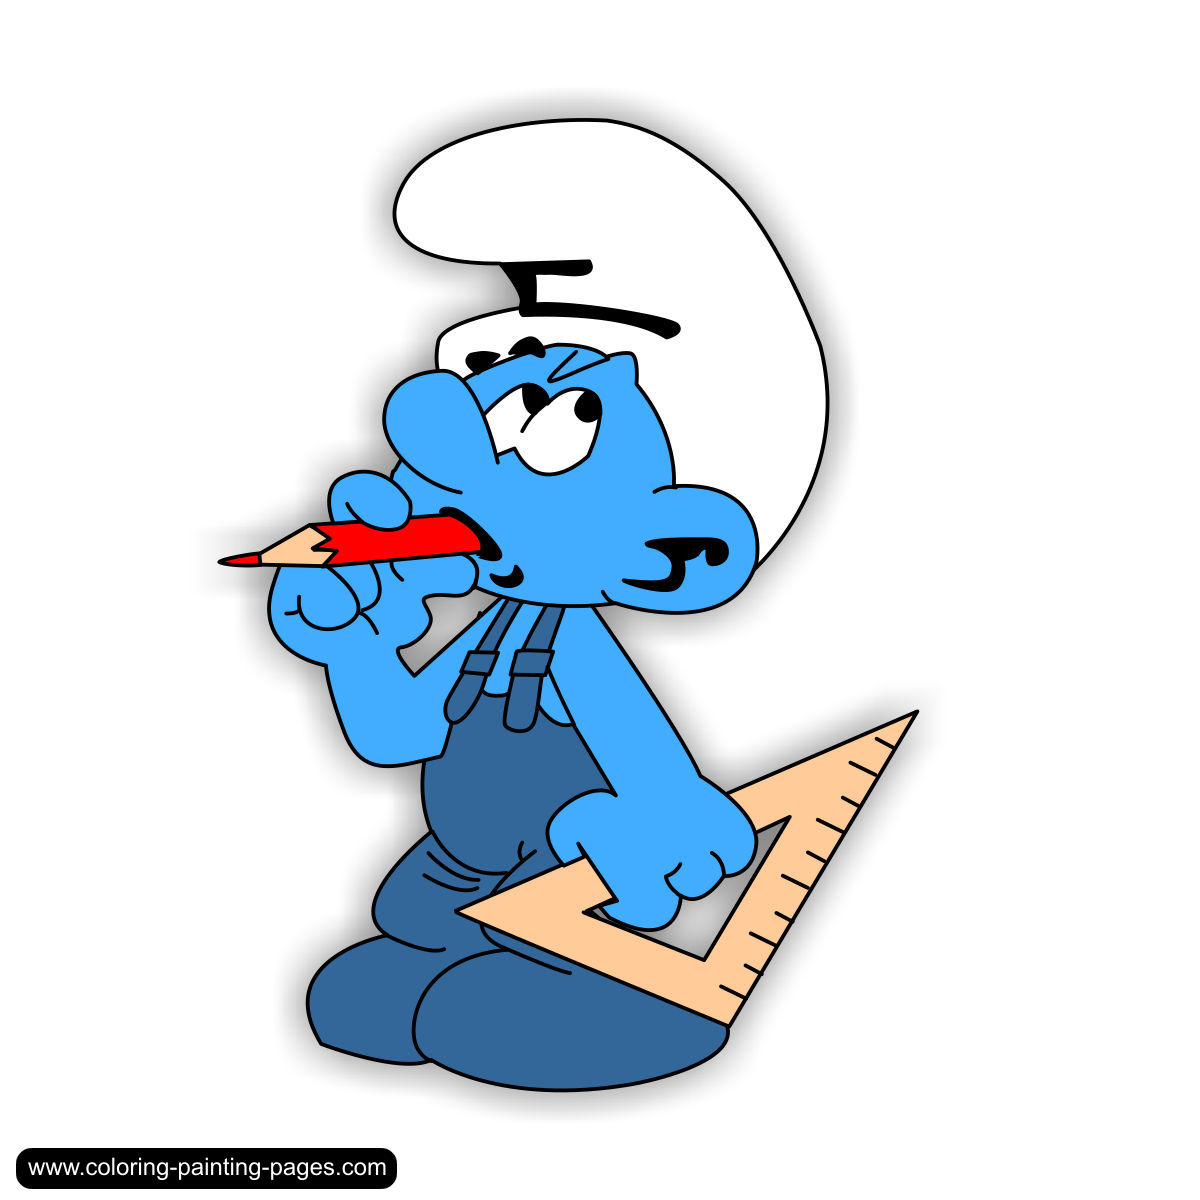 Which Smurf Are You? | Playbuzz